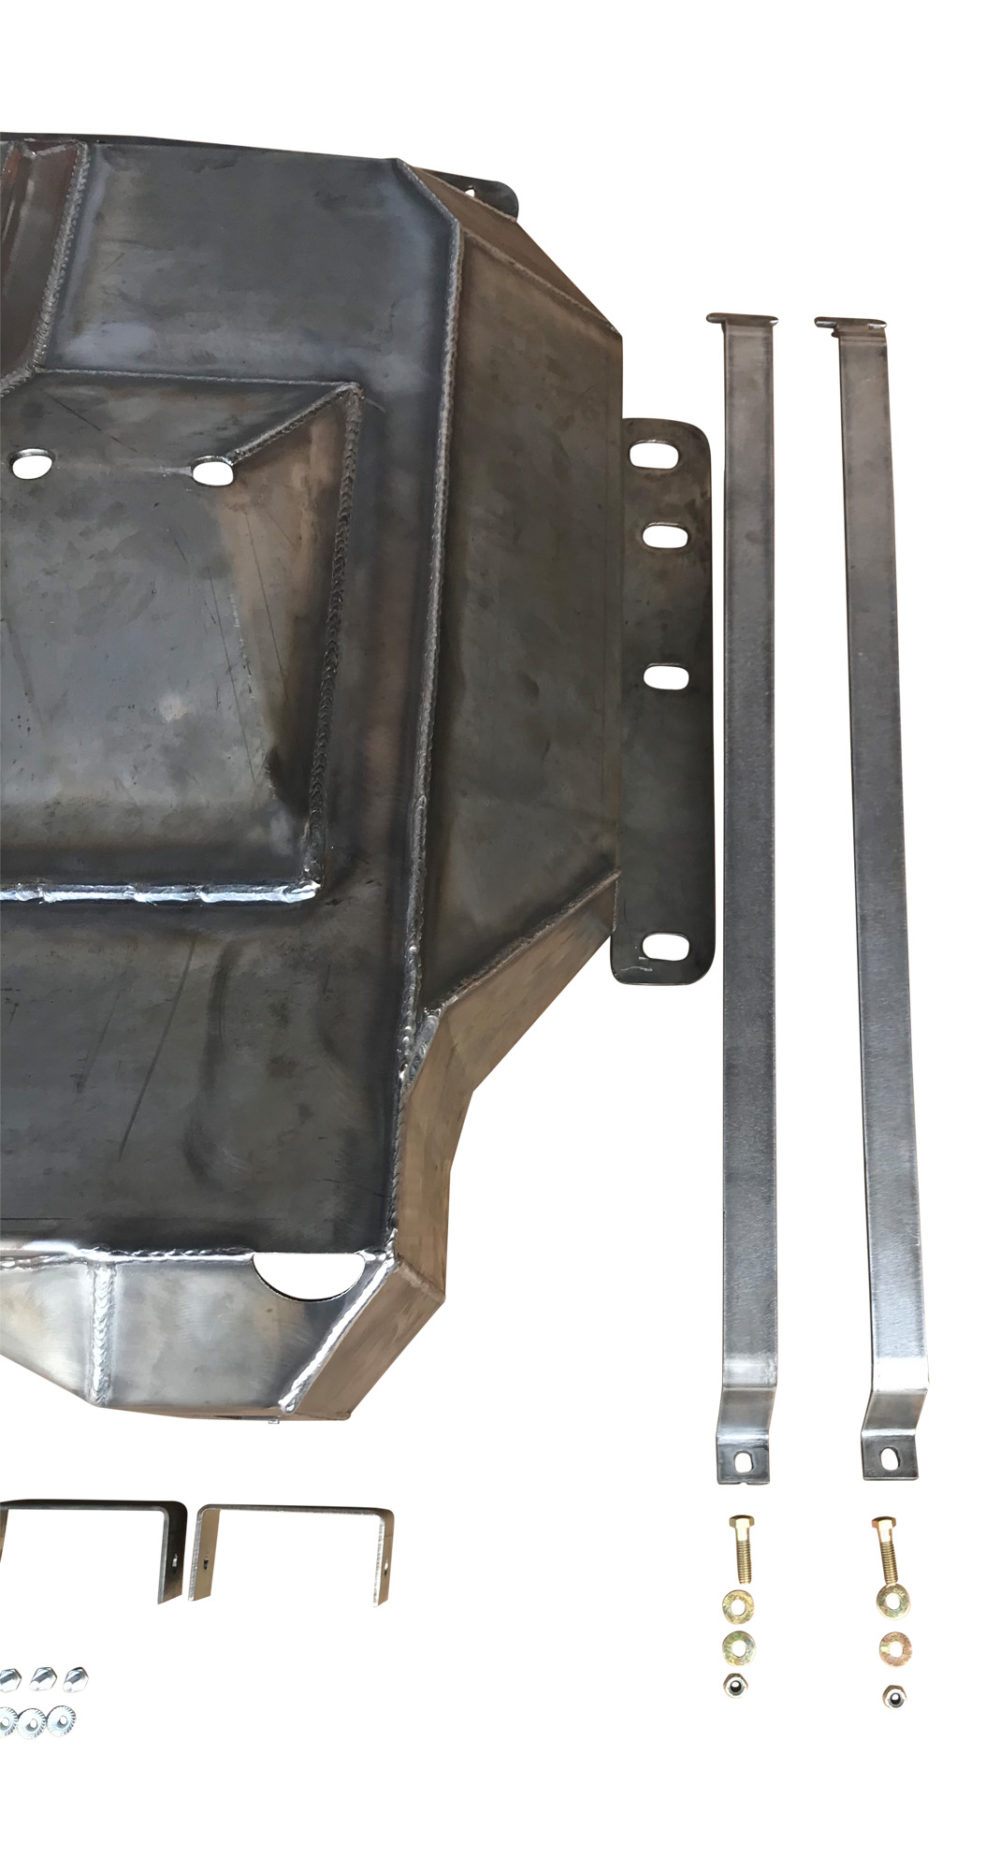 jeep grand cherokee wk gas tank skid plates replacement